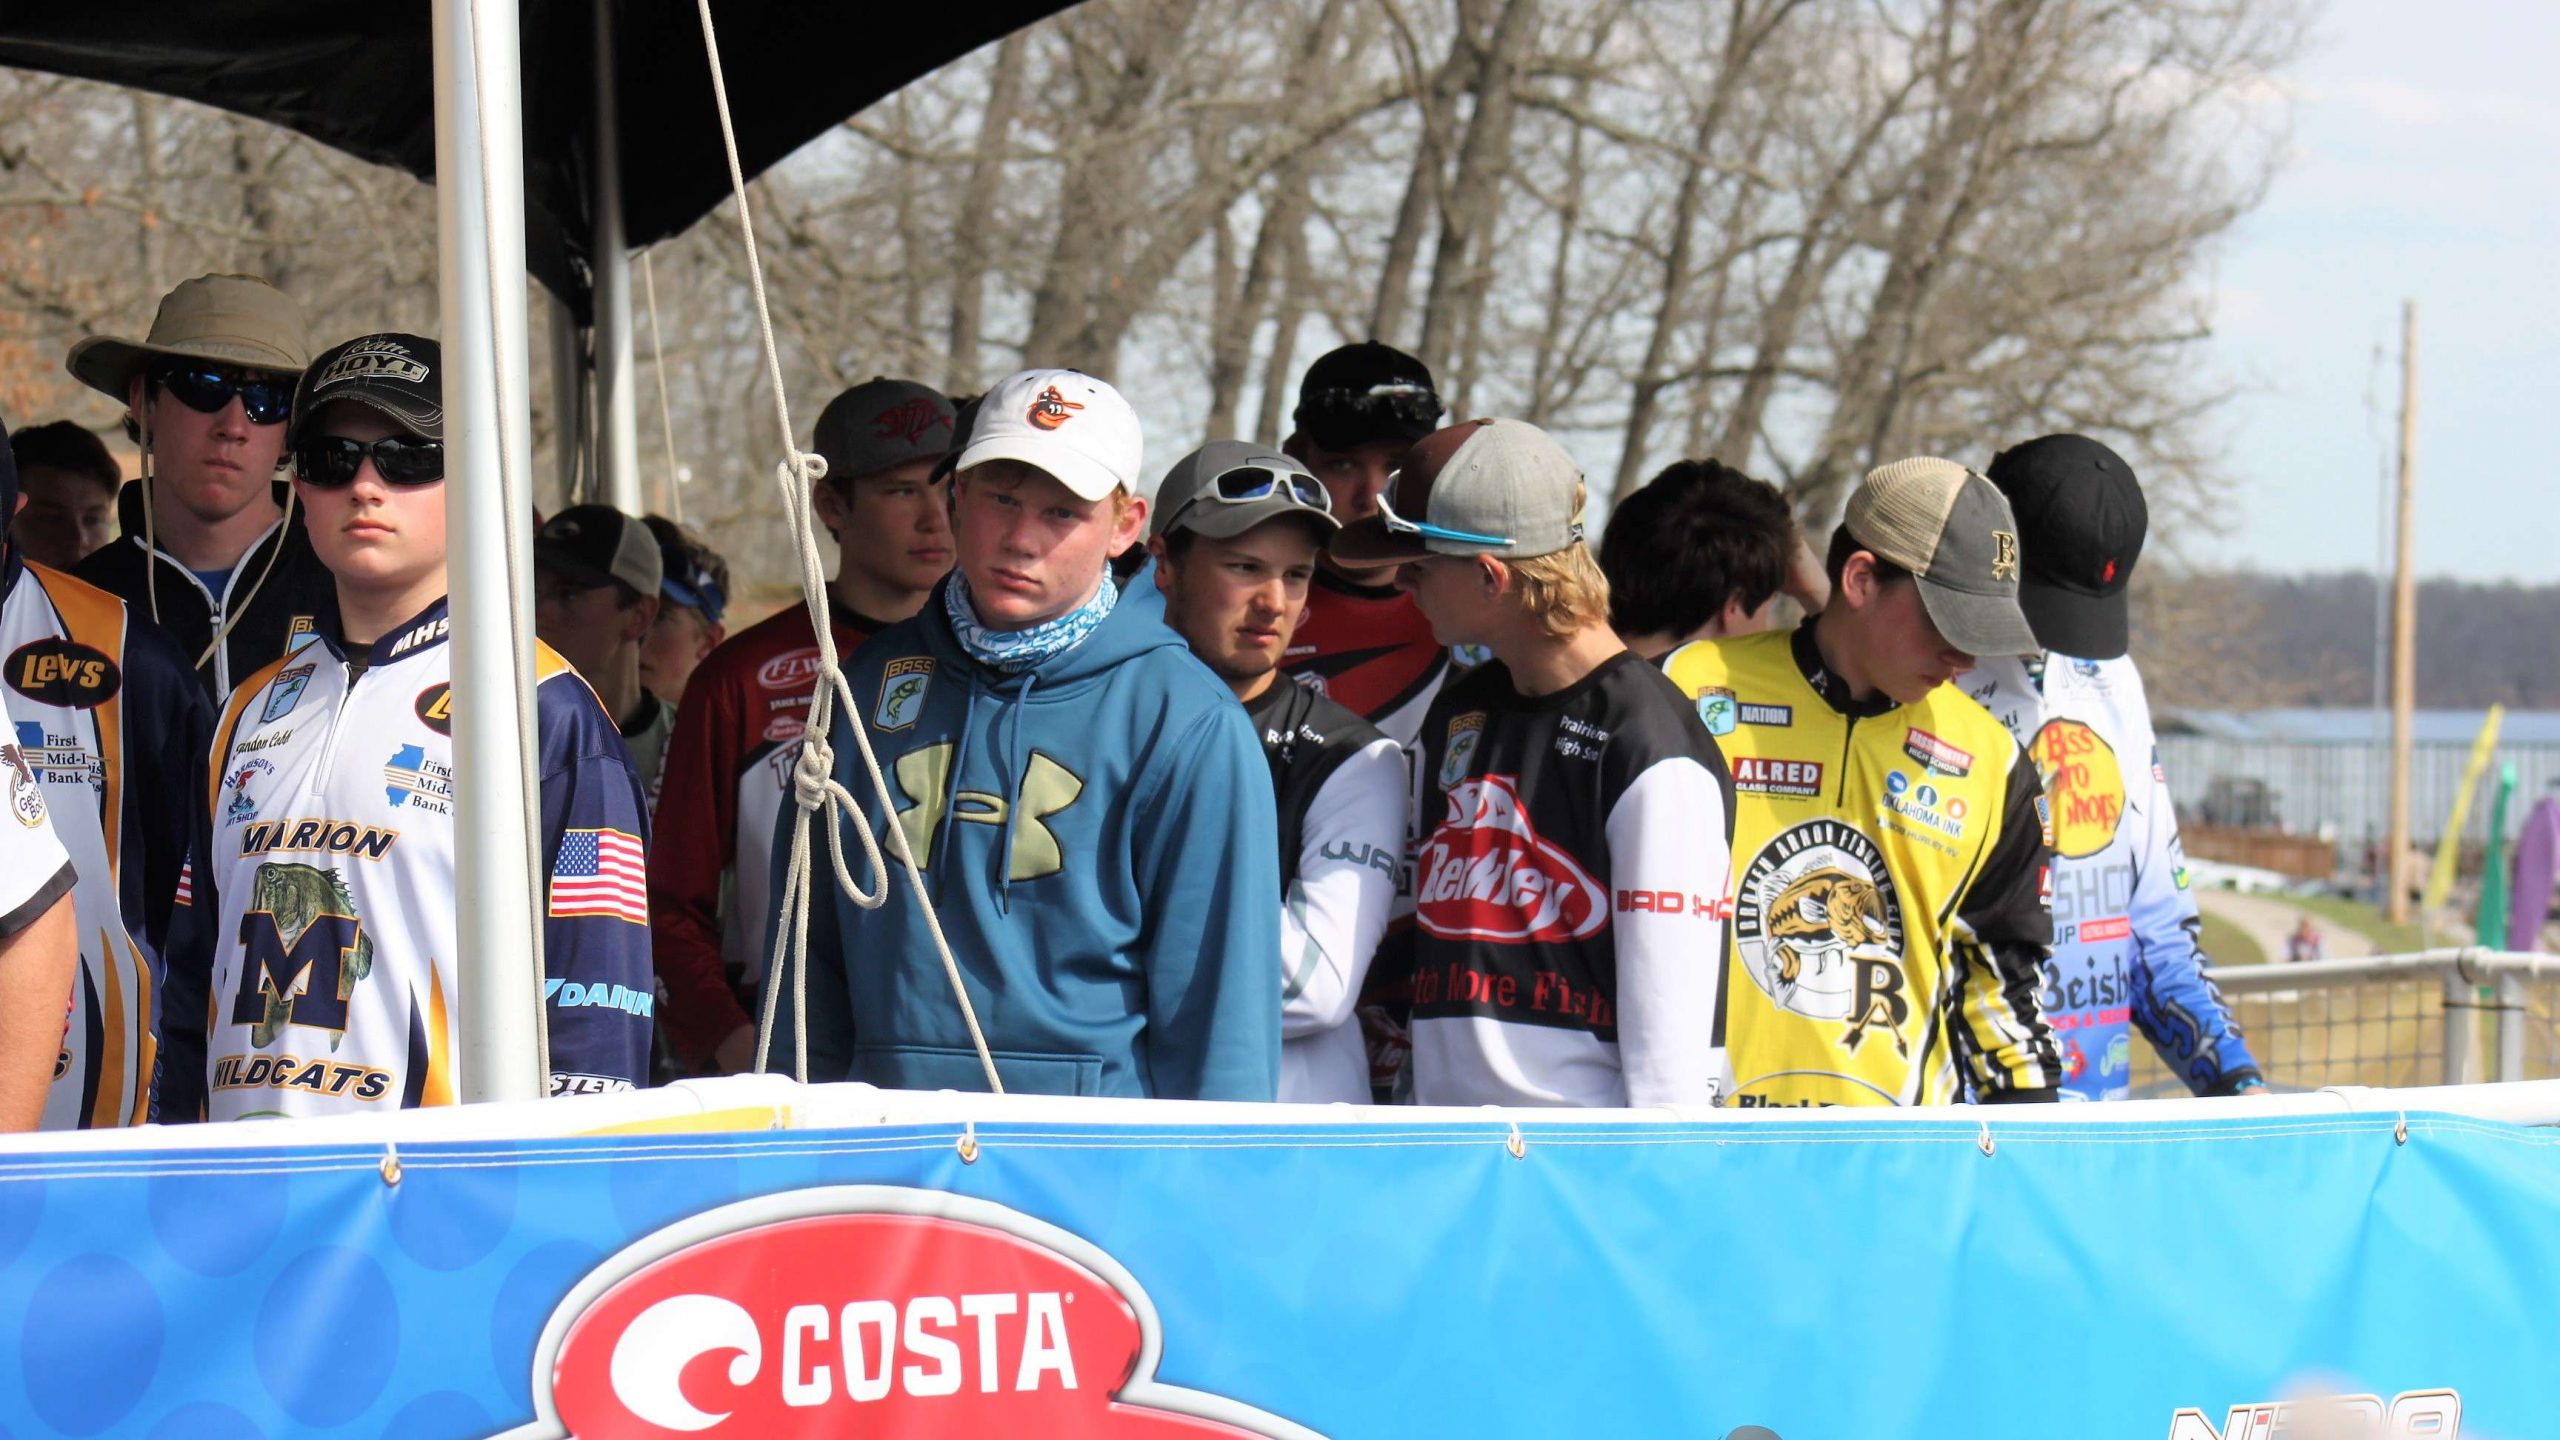 And the anglers are eager to know who's going to win this thing.